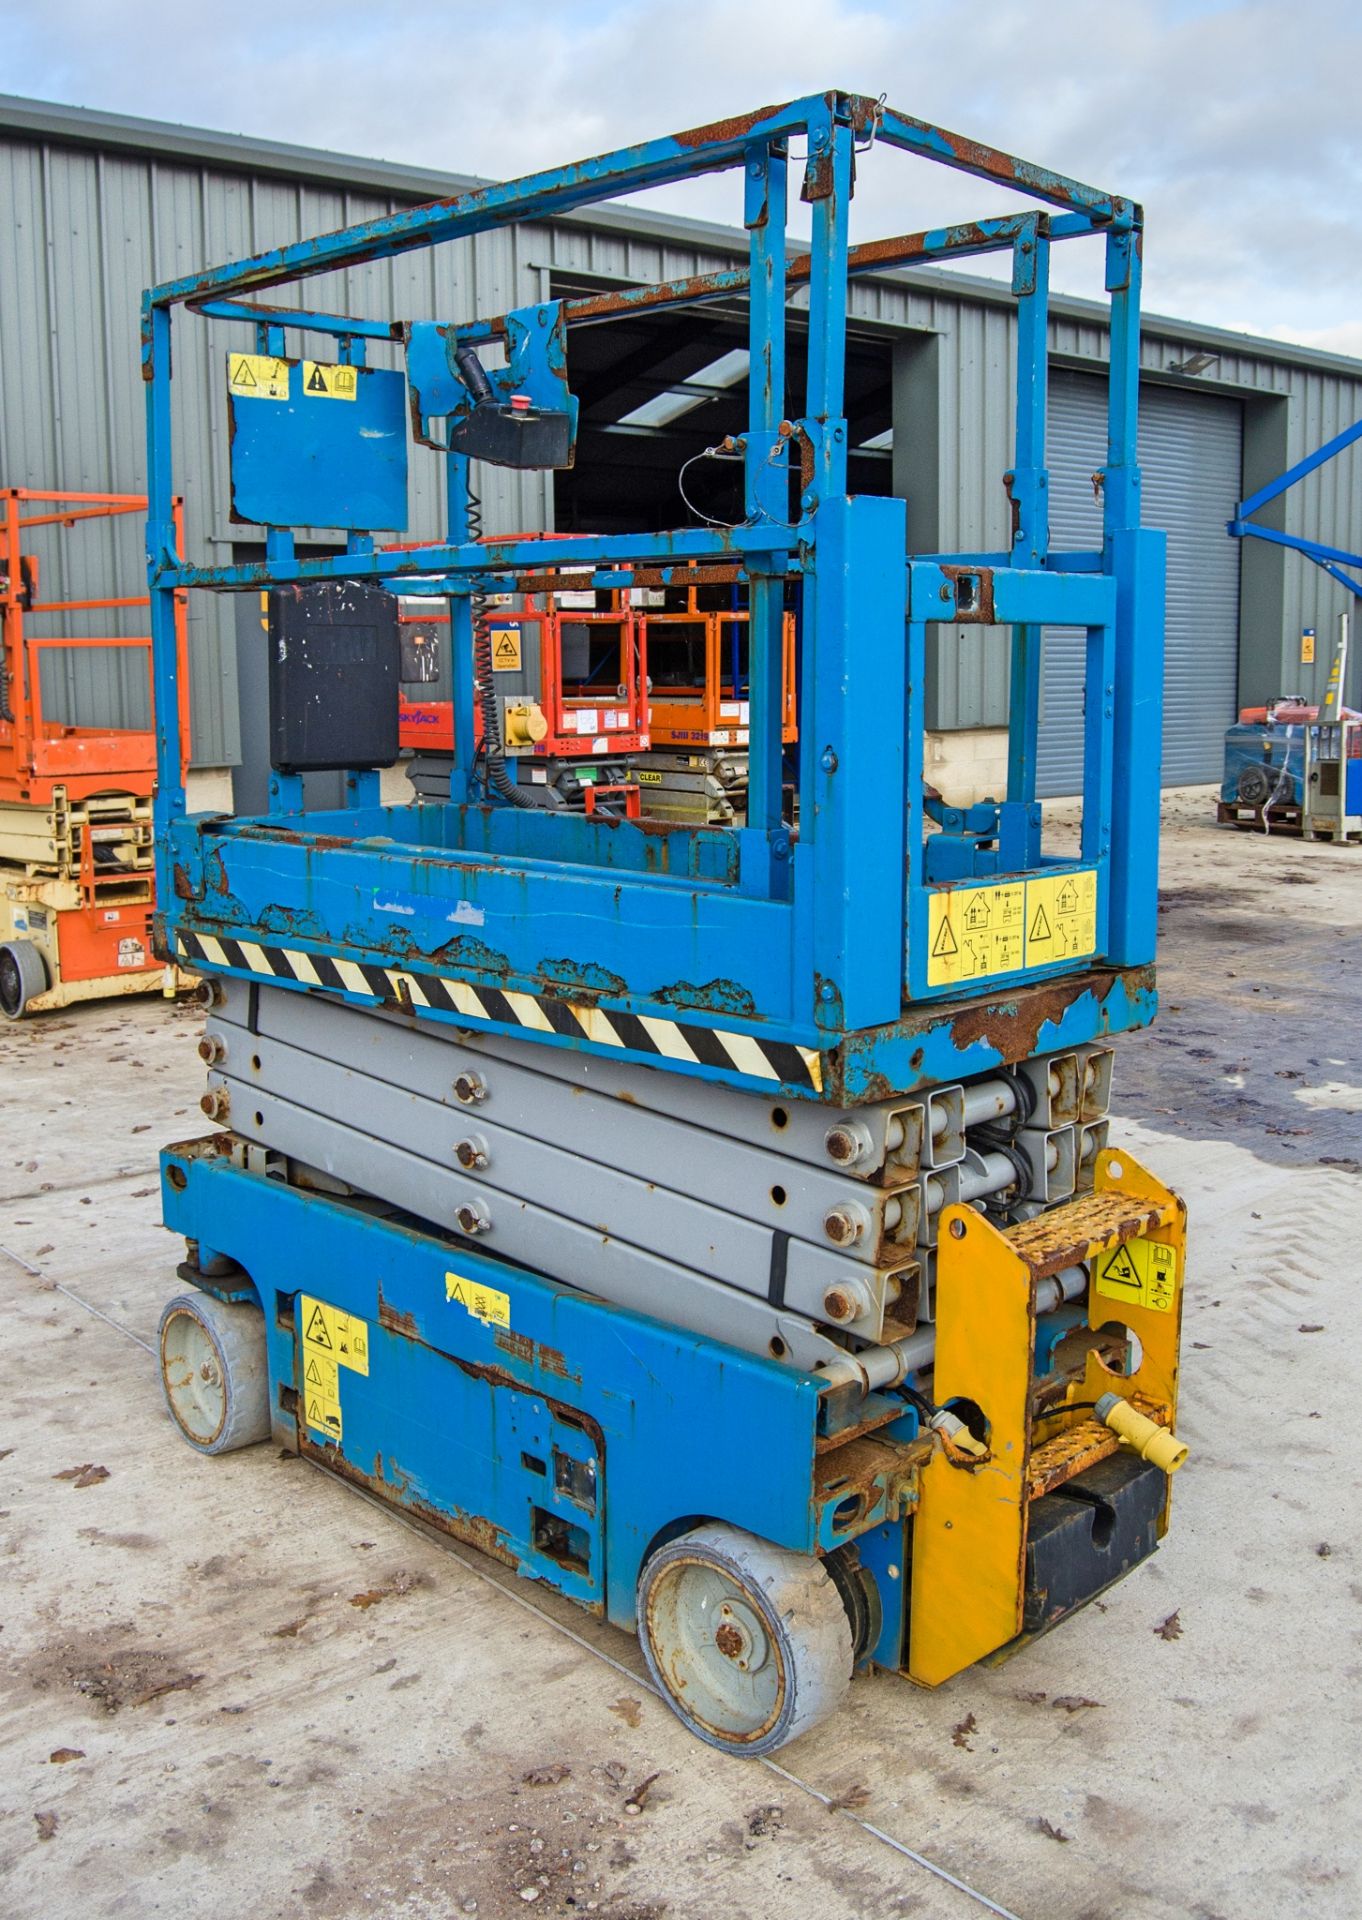 Genie GS1932 battery electric scissor lift access platform Year: 2014 S/N: 15867 Recorded Hours: